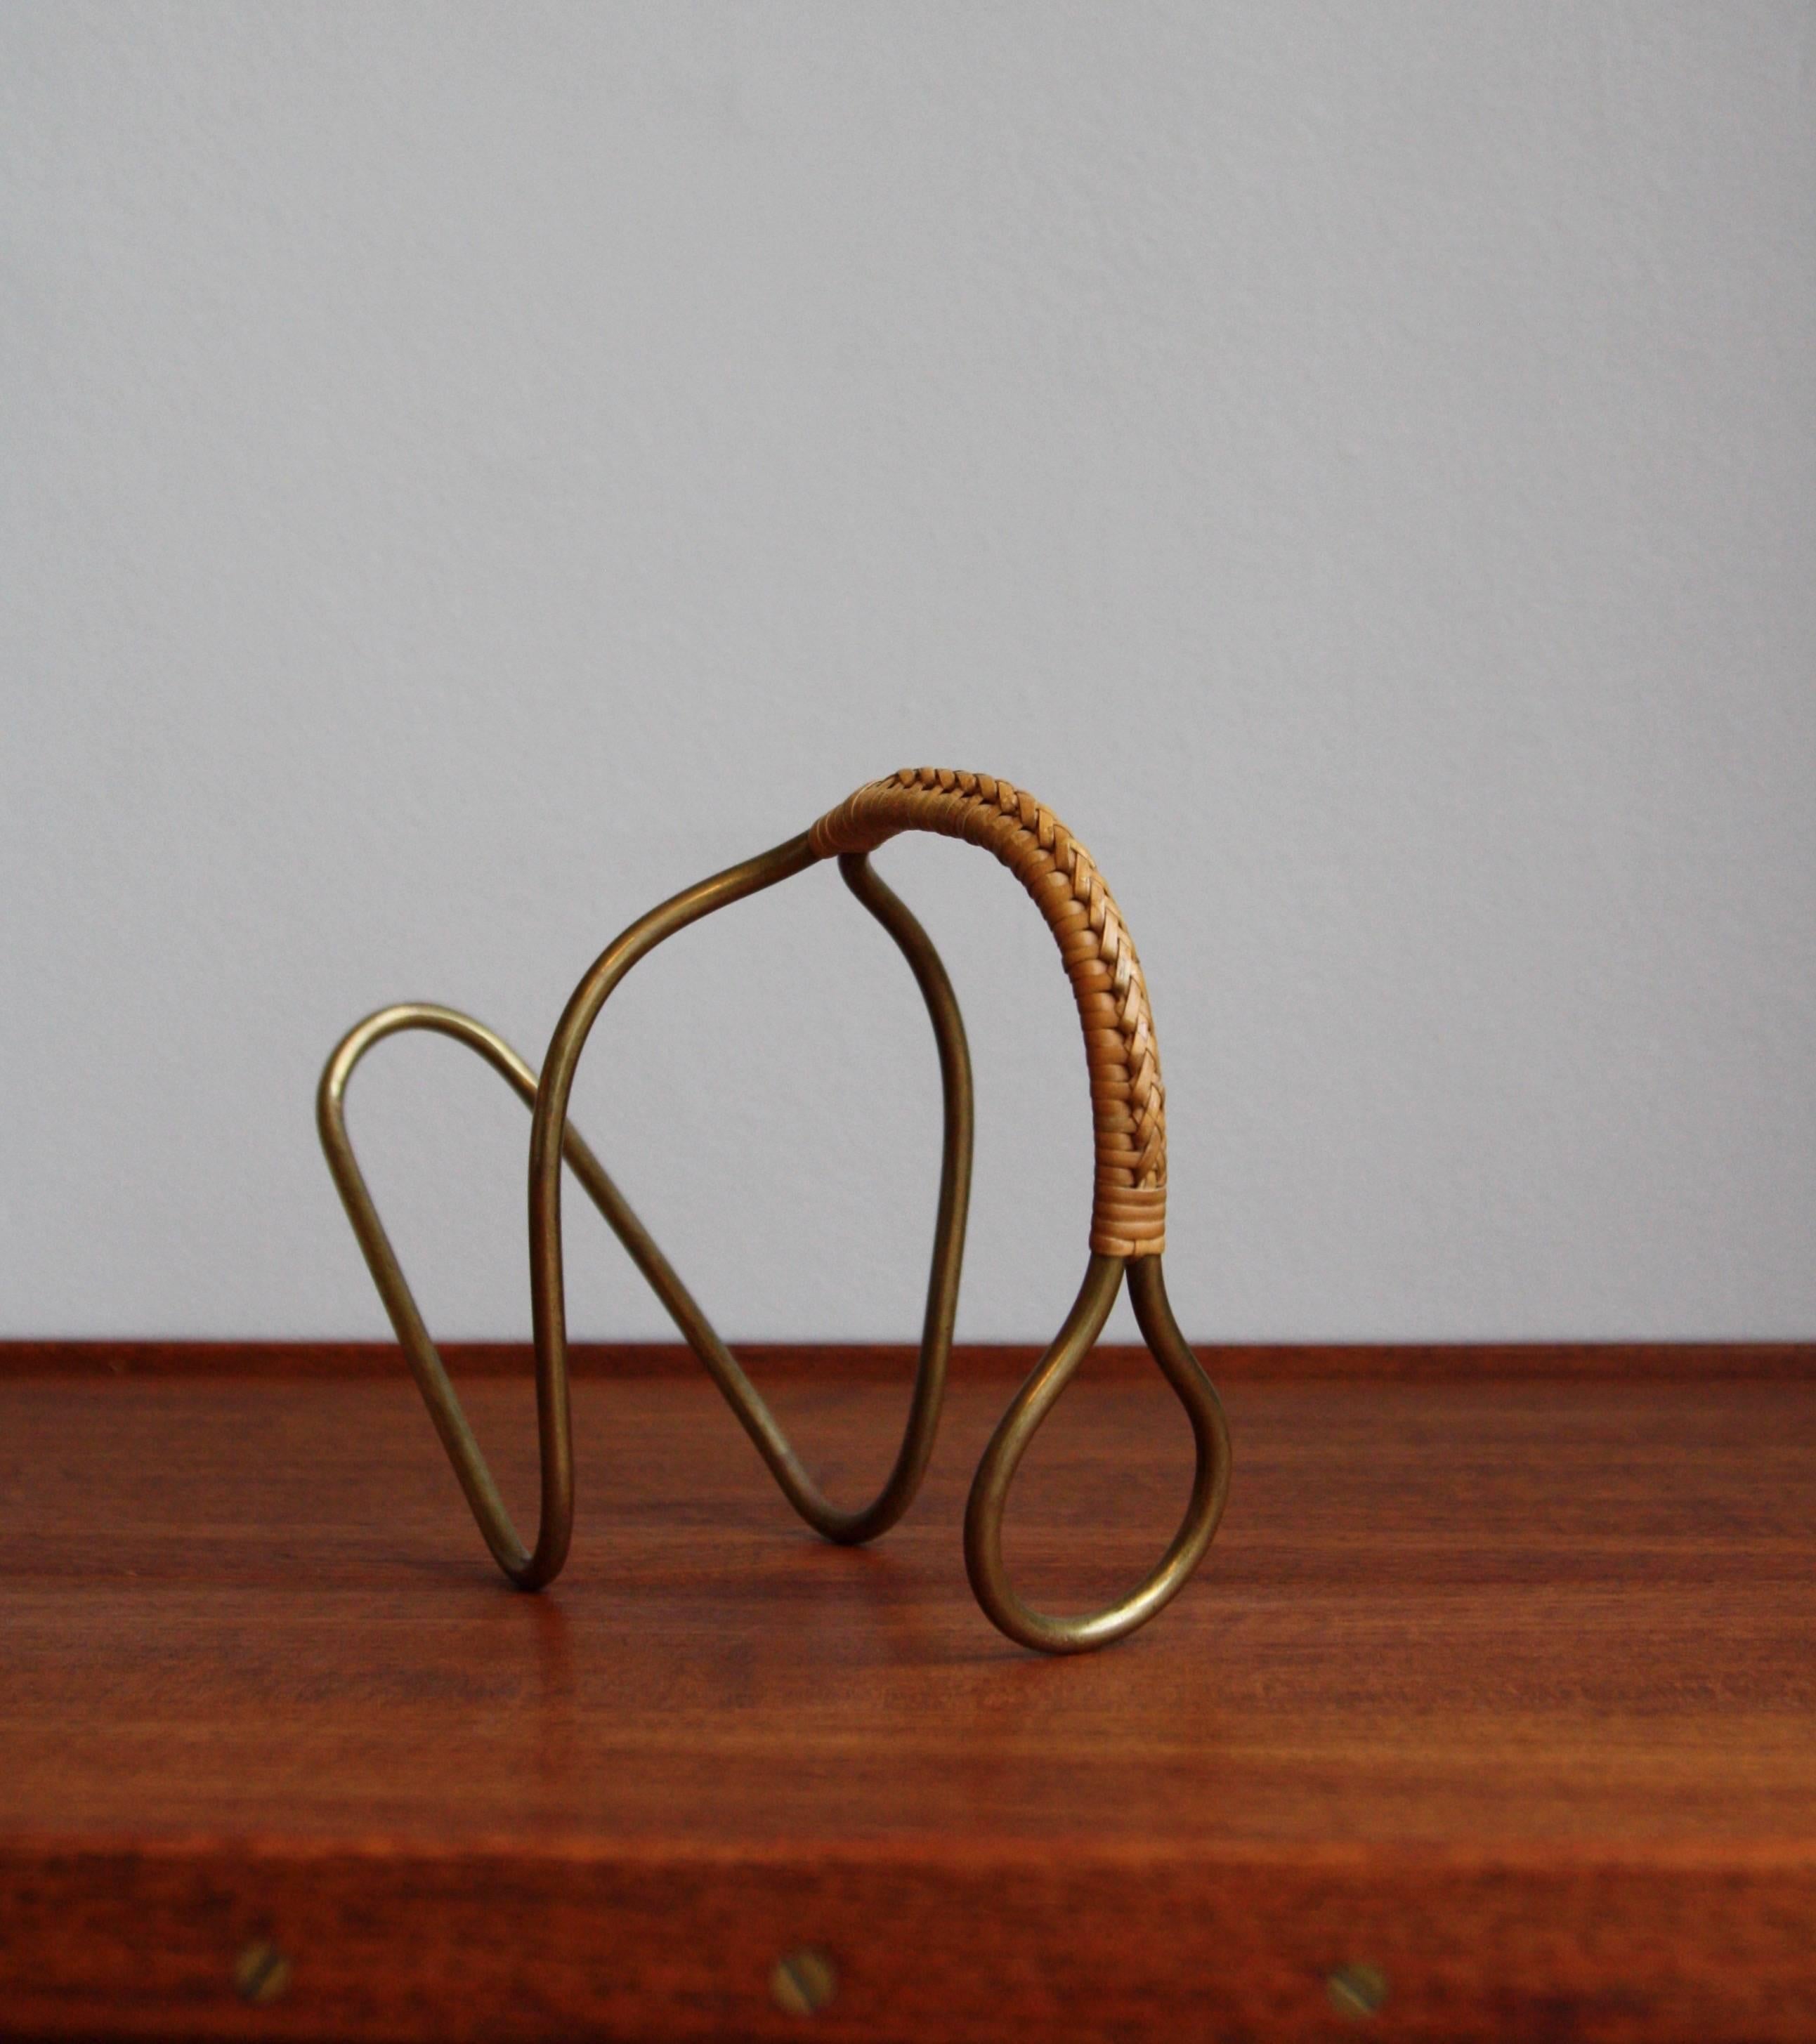 A sculptural bottle holder in solid brass wire and cane designed and made by Carl Auböck II, circa 1950. This device is intended to hold a bottle of wine in a way that helps the wine aerate and the sediment settle.
The patination on both the brass